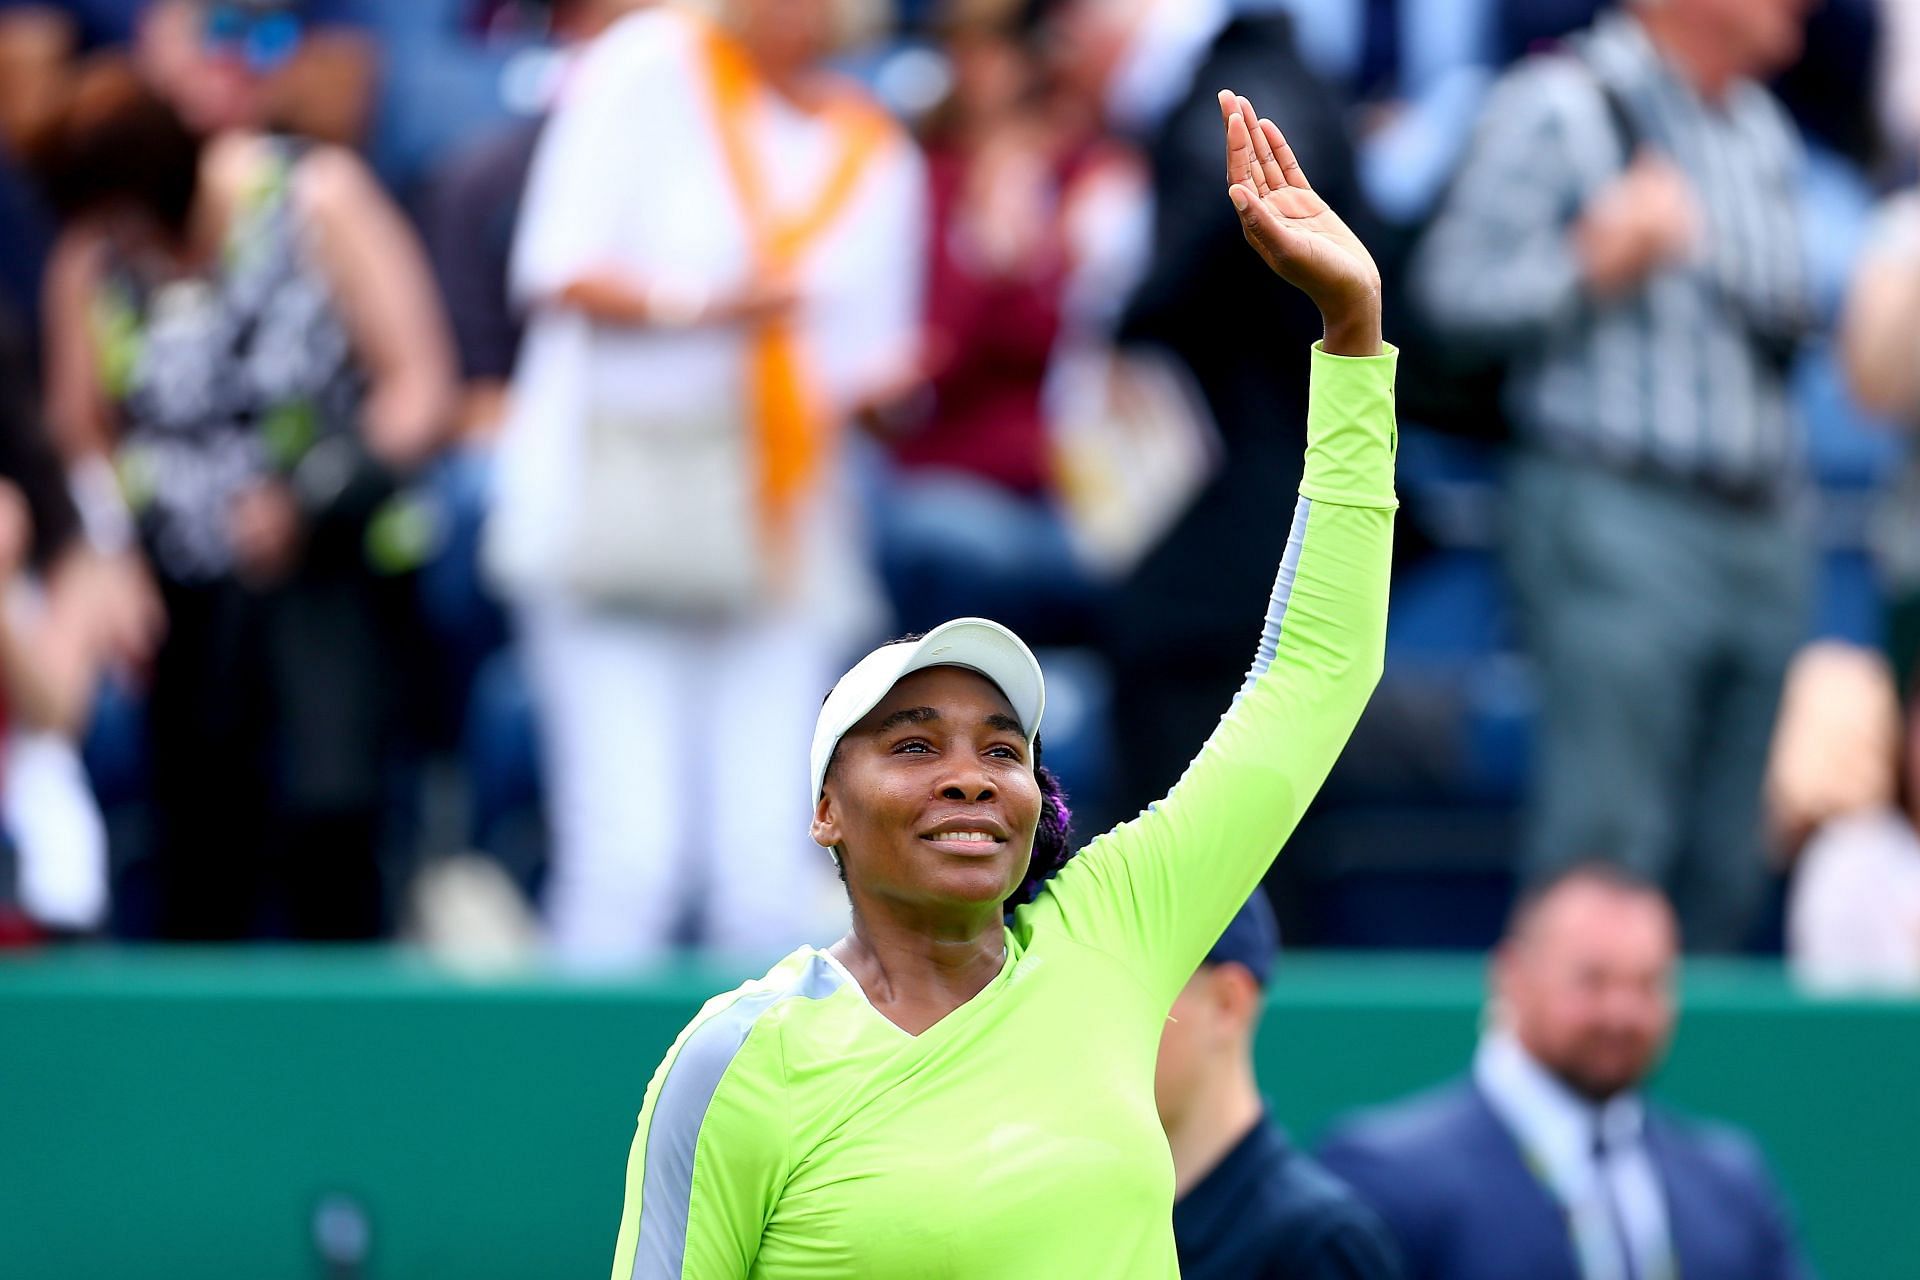 Venus Williams waves to the crowd at a tournament